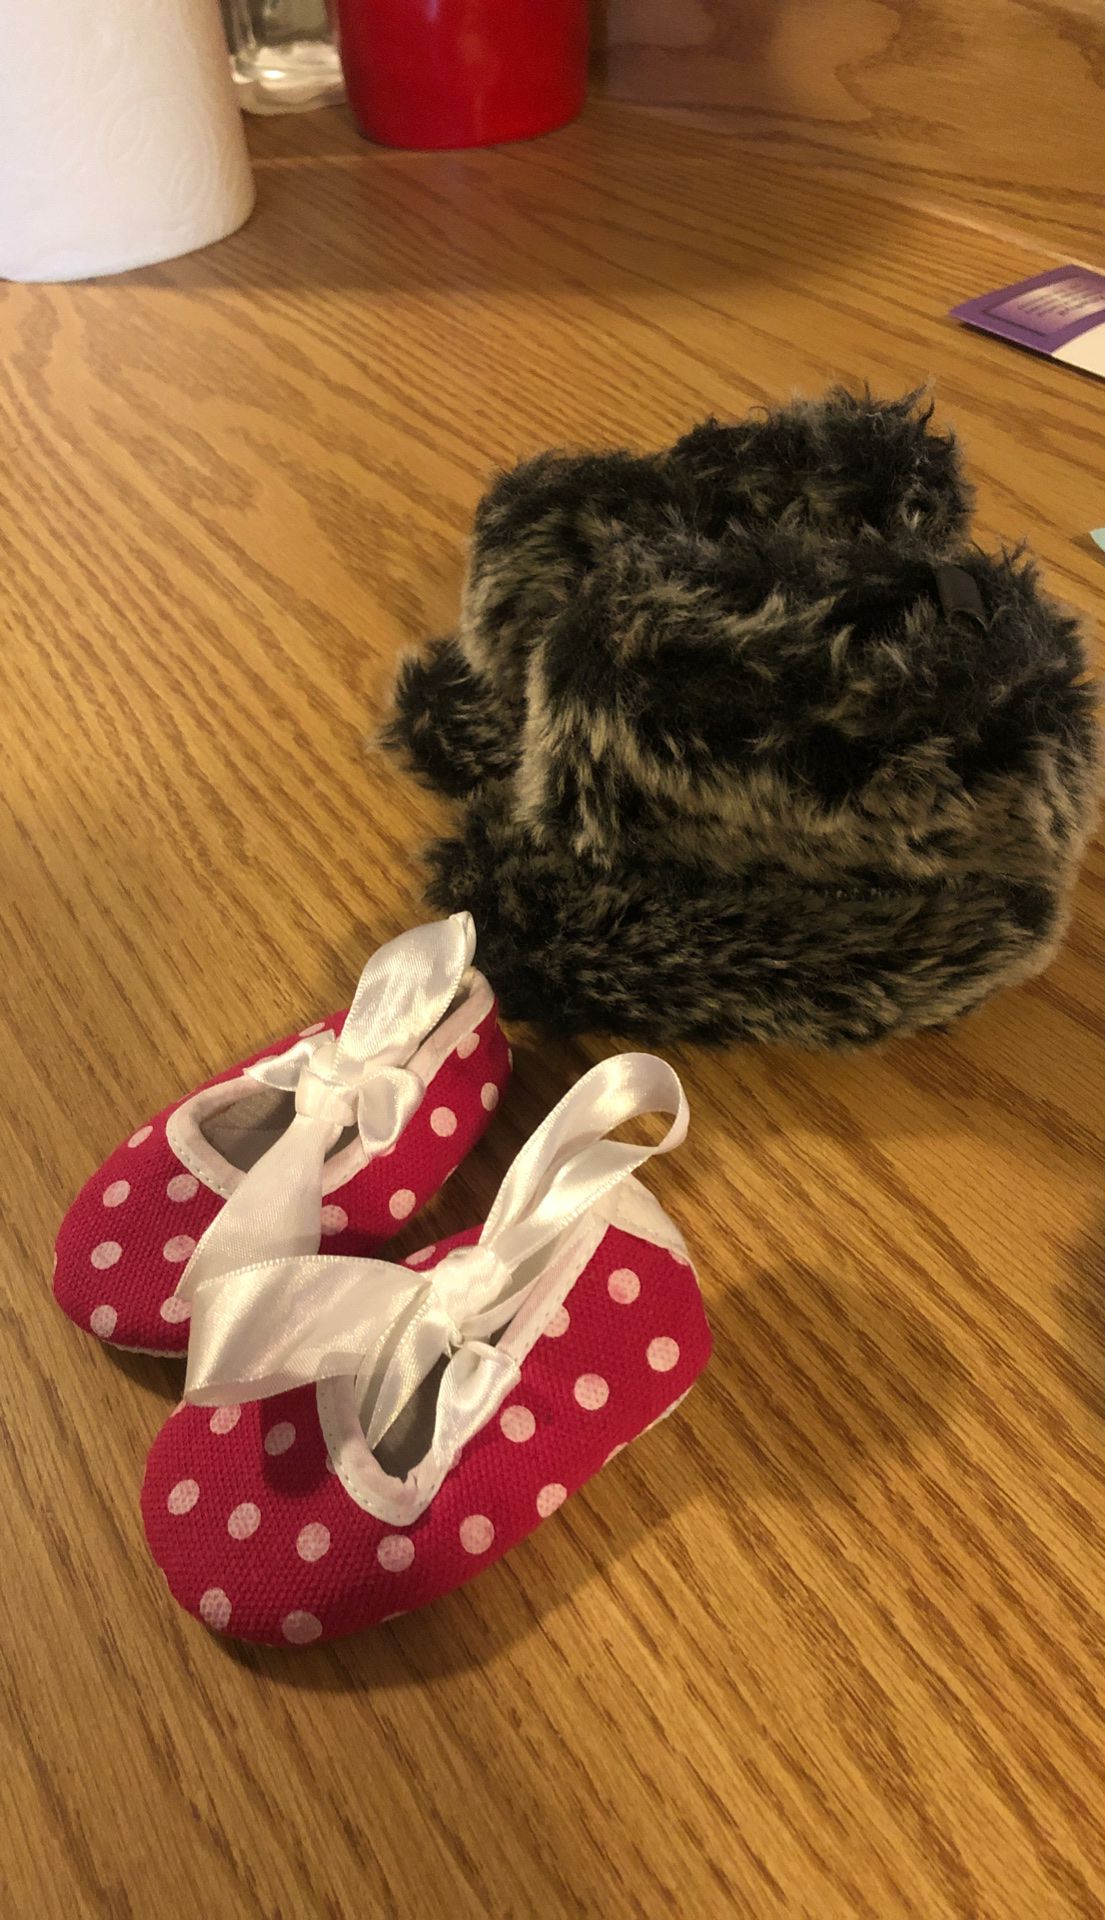 Size 10 baby girls soft boots and slippers